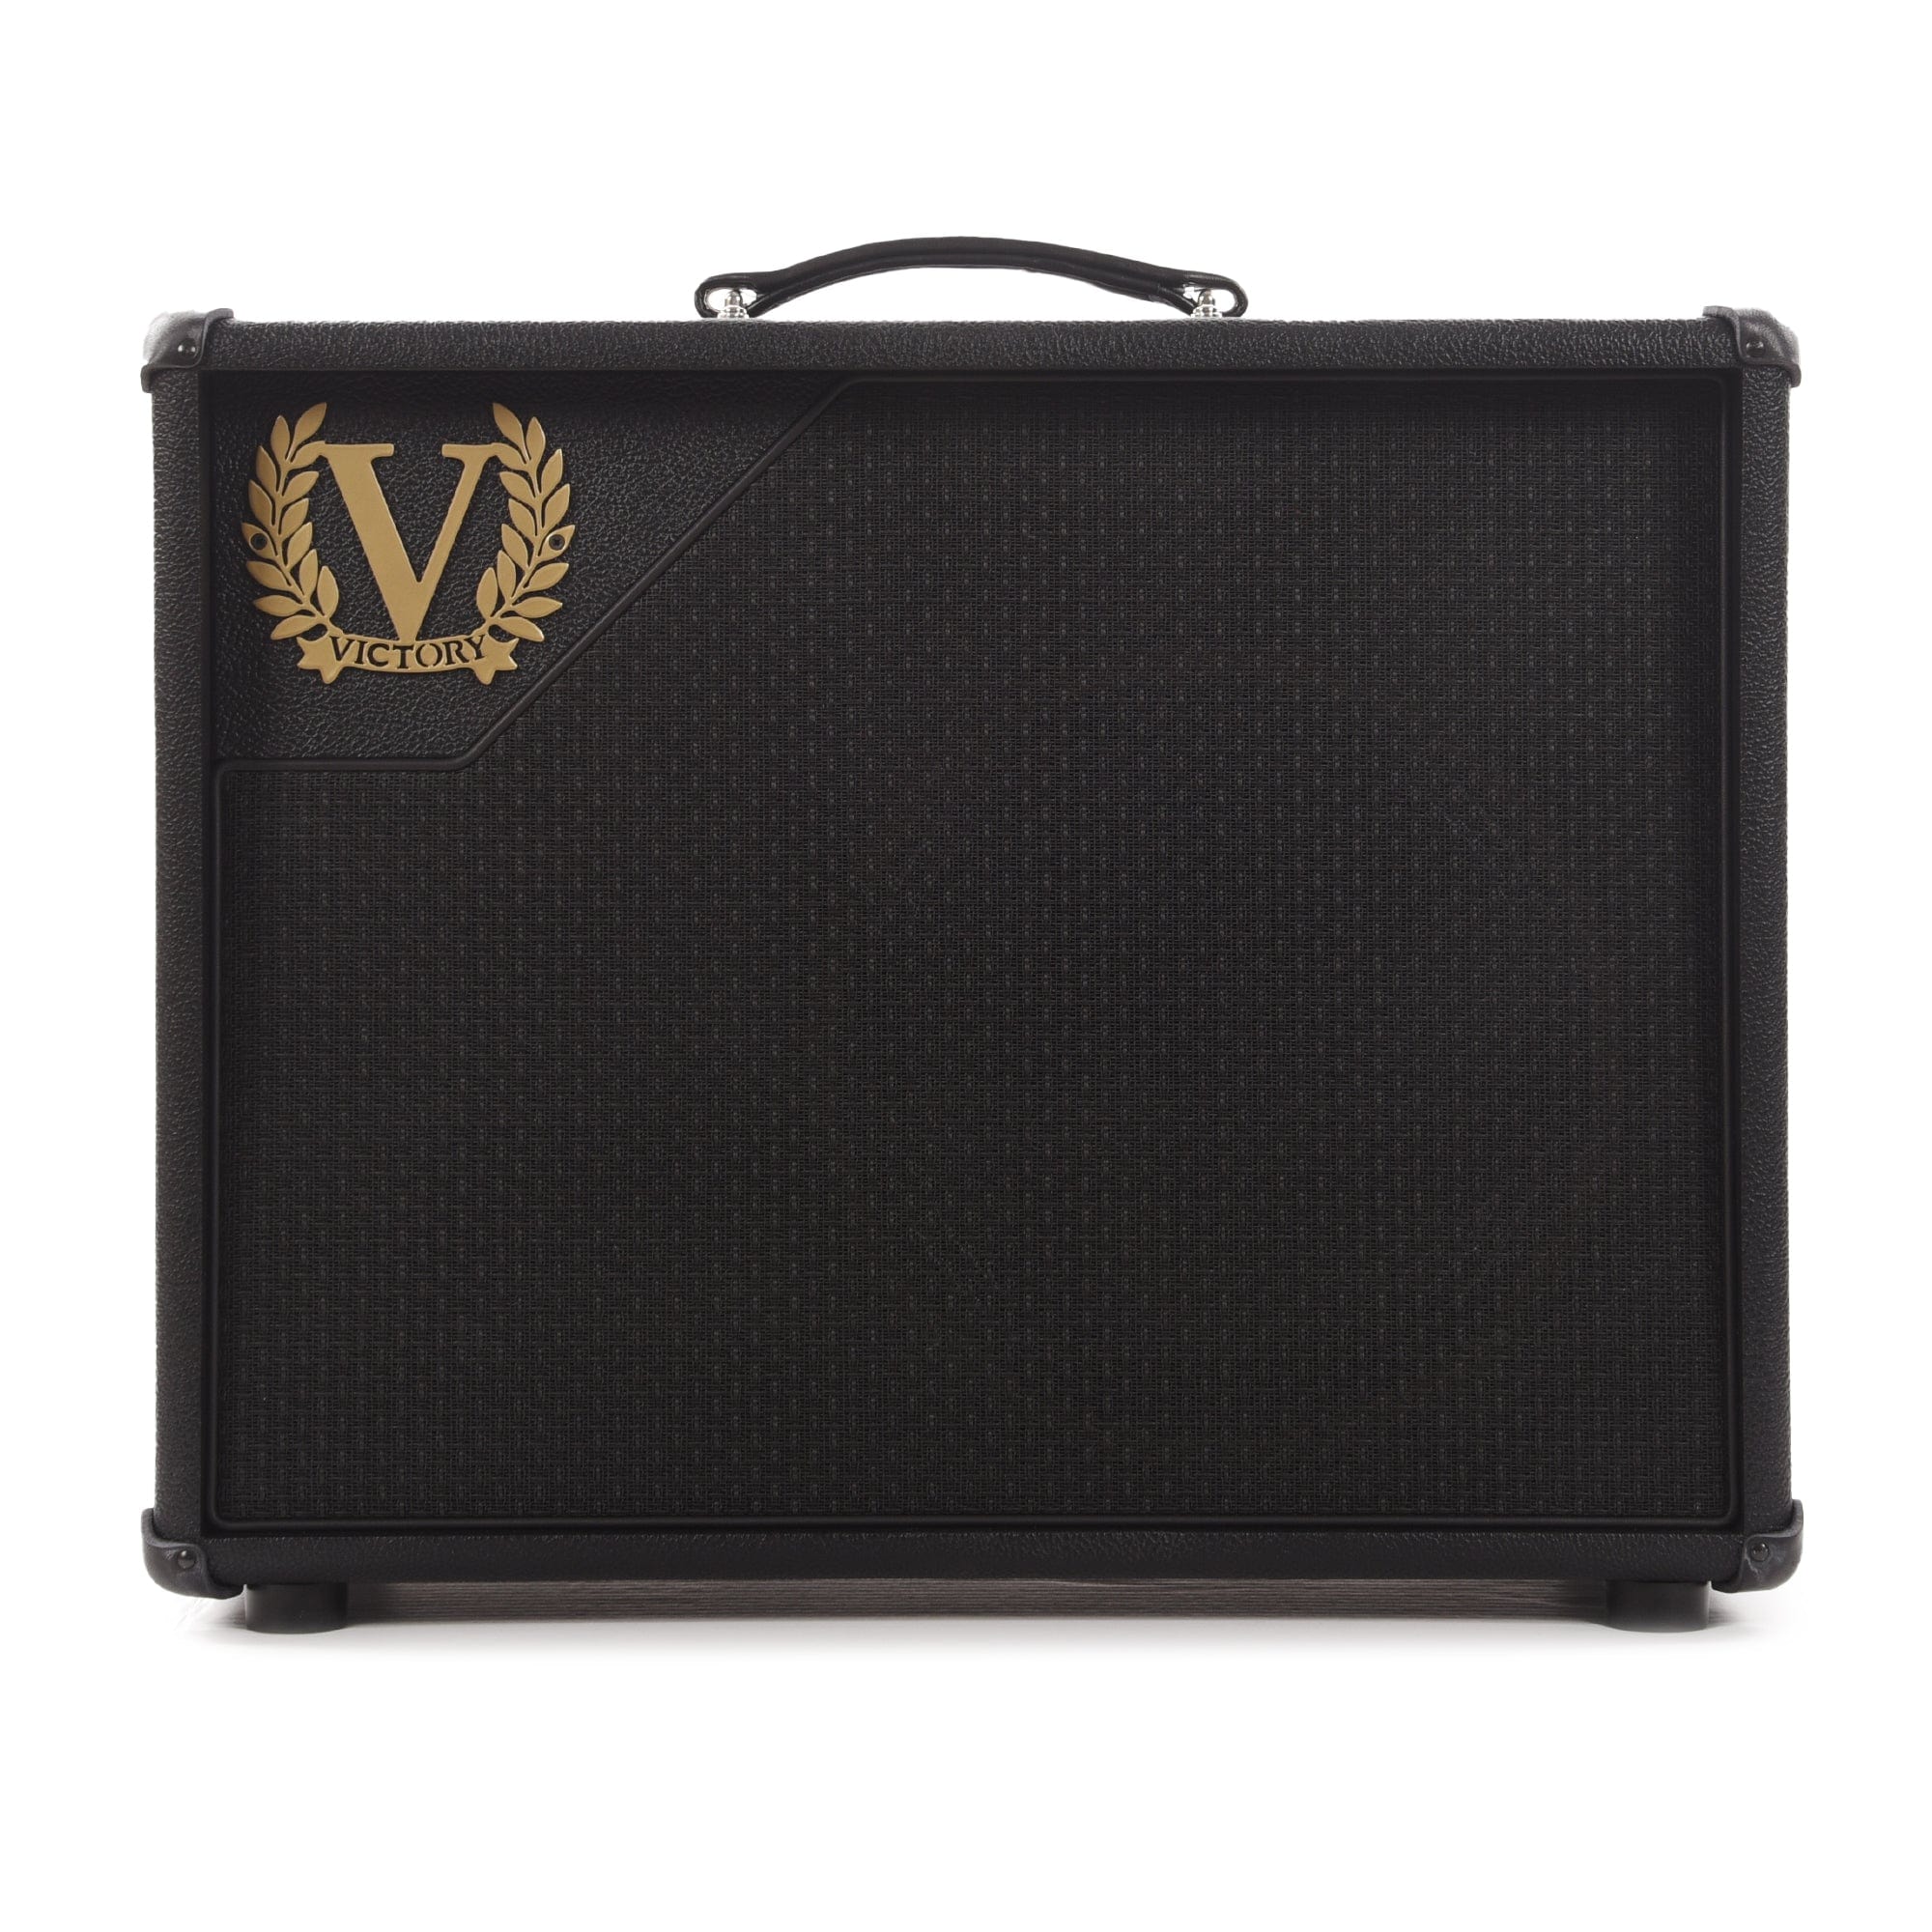 Victory Sheriff 25 1x12 Combo Amps / Guitar Combos